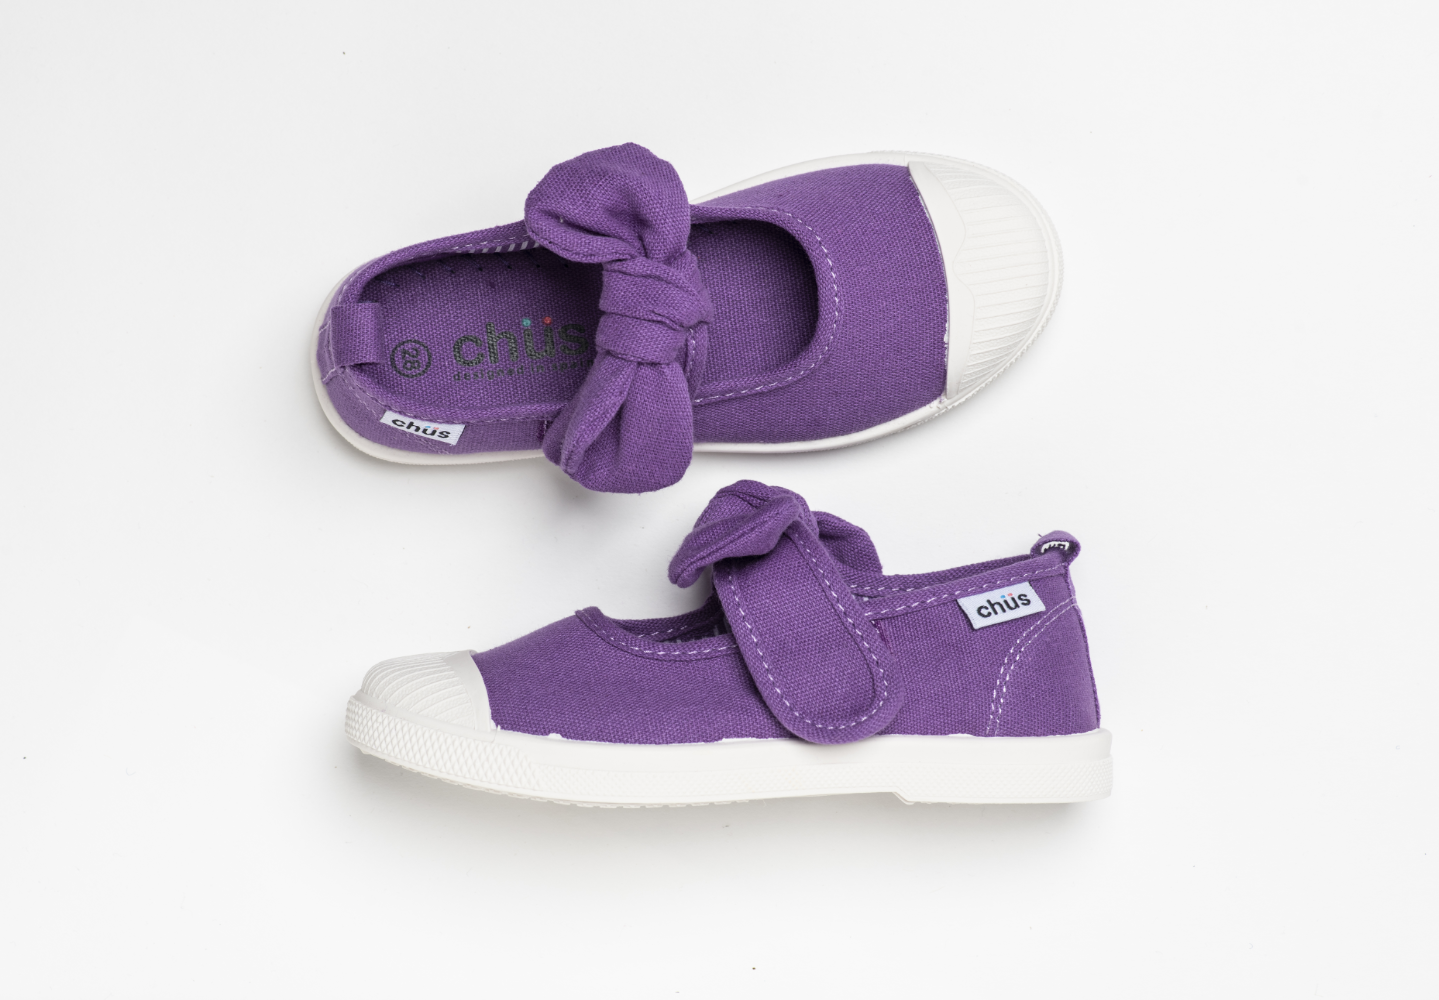 Canvas sneakers with single velcro strap and removable bow tie in purple. Adorable monogrammed. Chus Shoes. Top view.